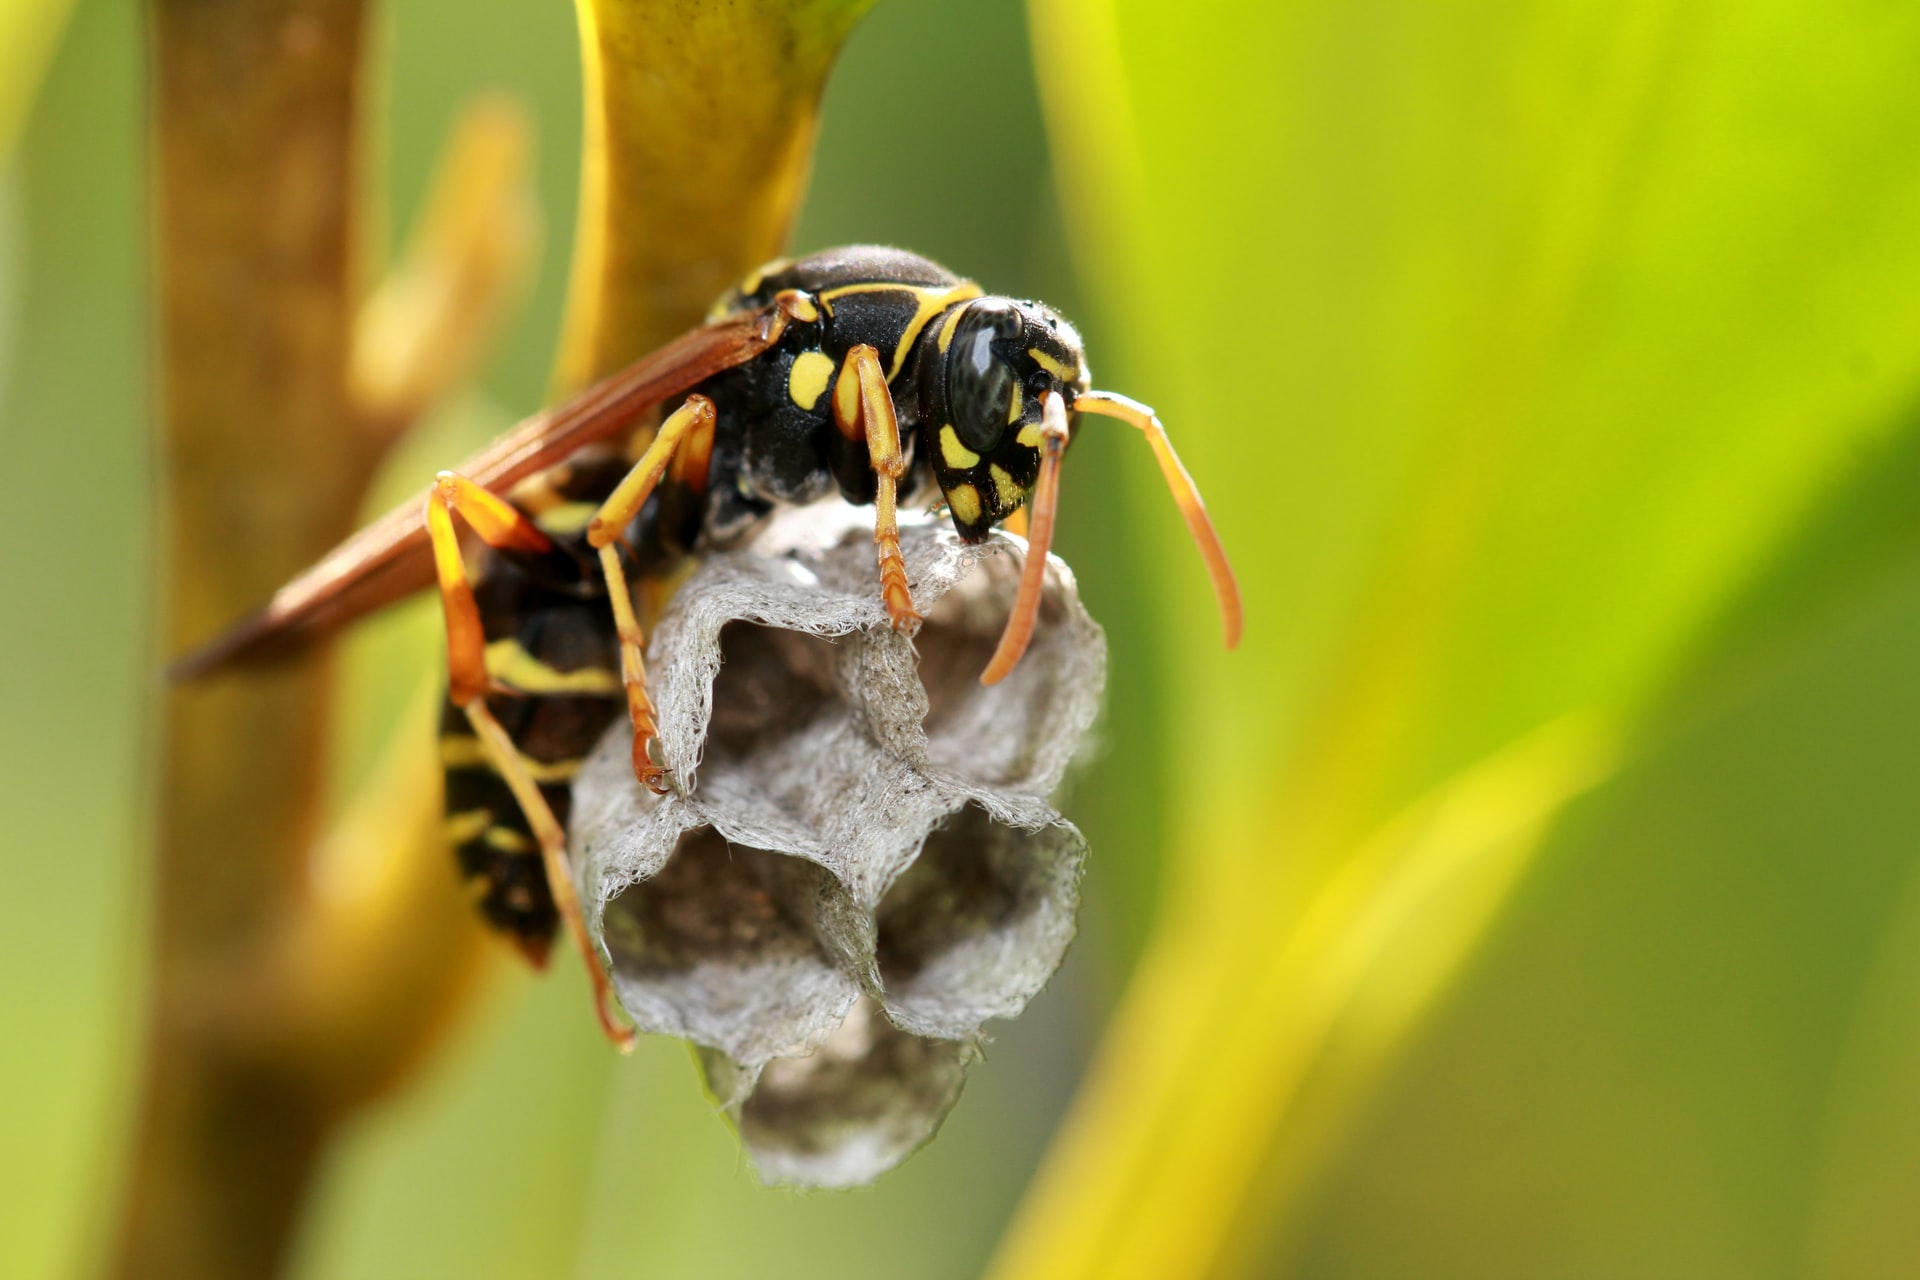 Photograph of a single paper wasps on top of nest